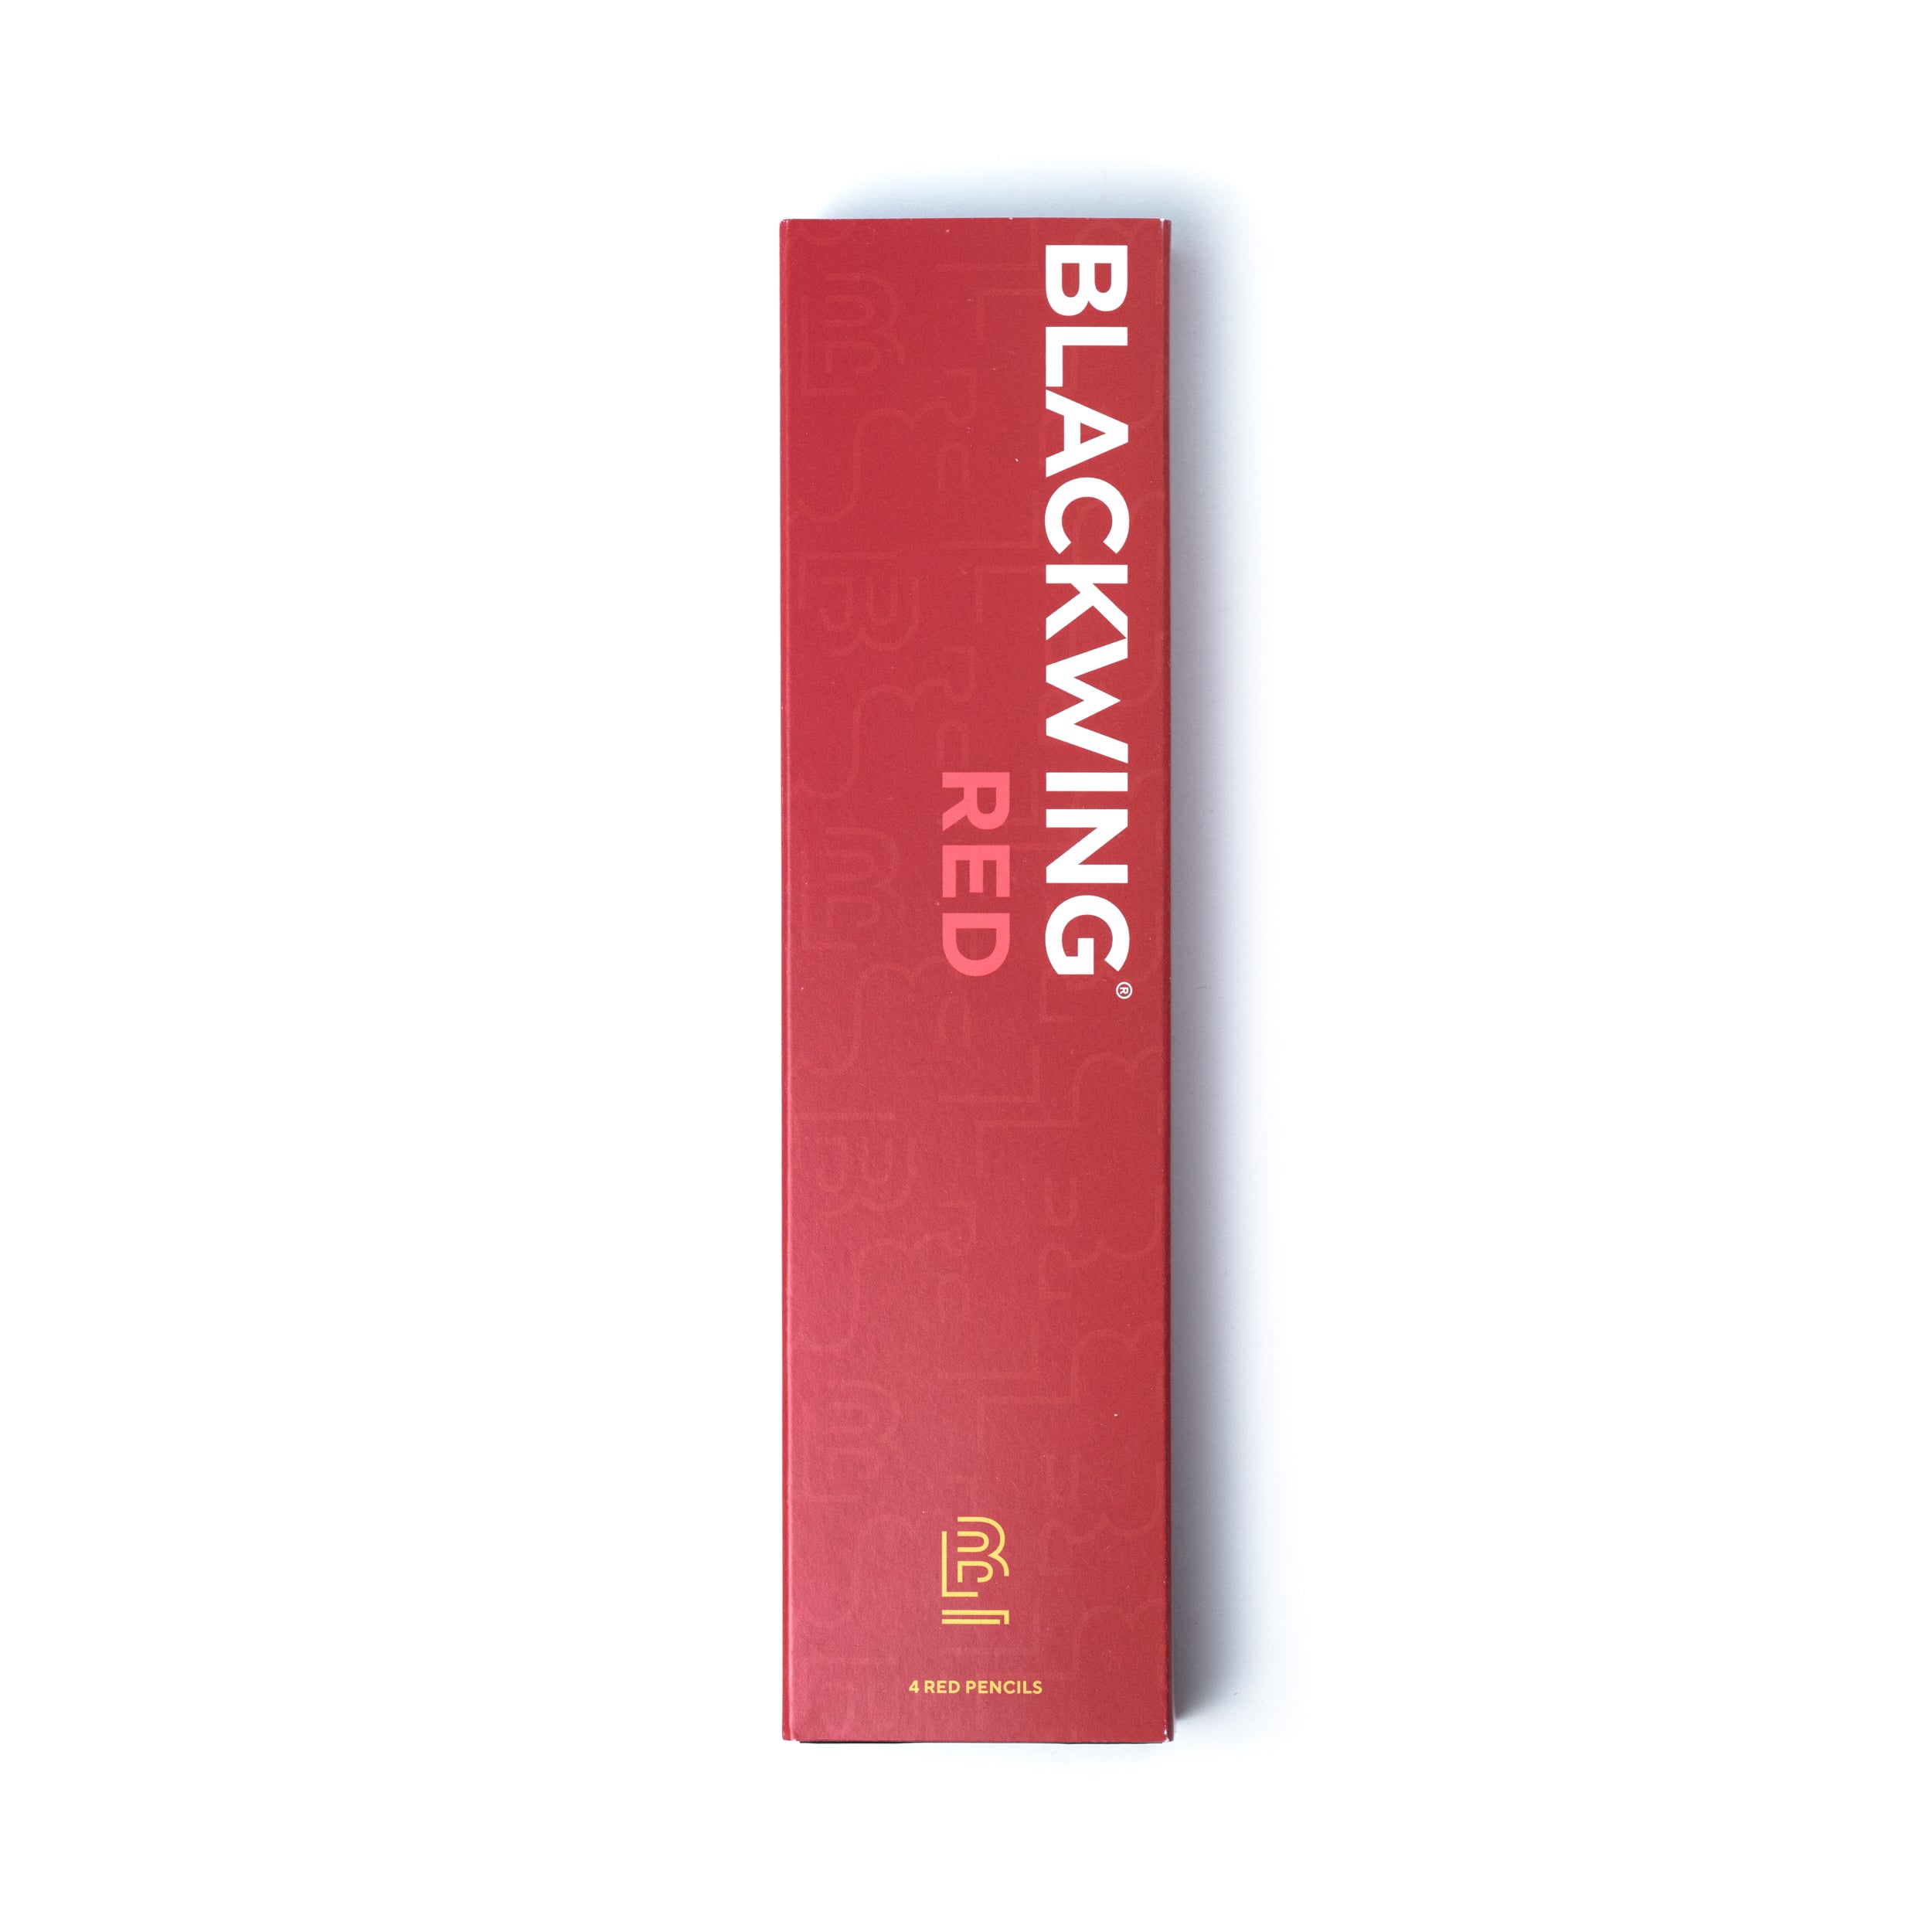 A box of Blackwing Red e-liquid on a white background.